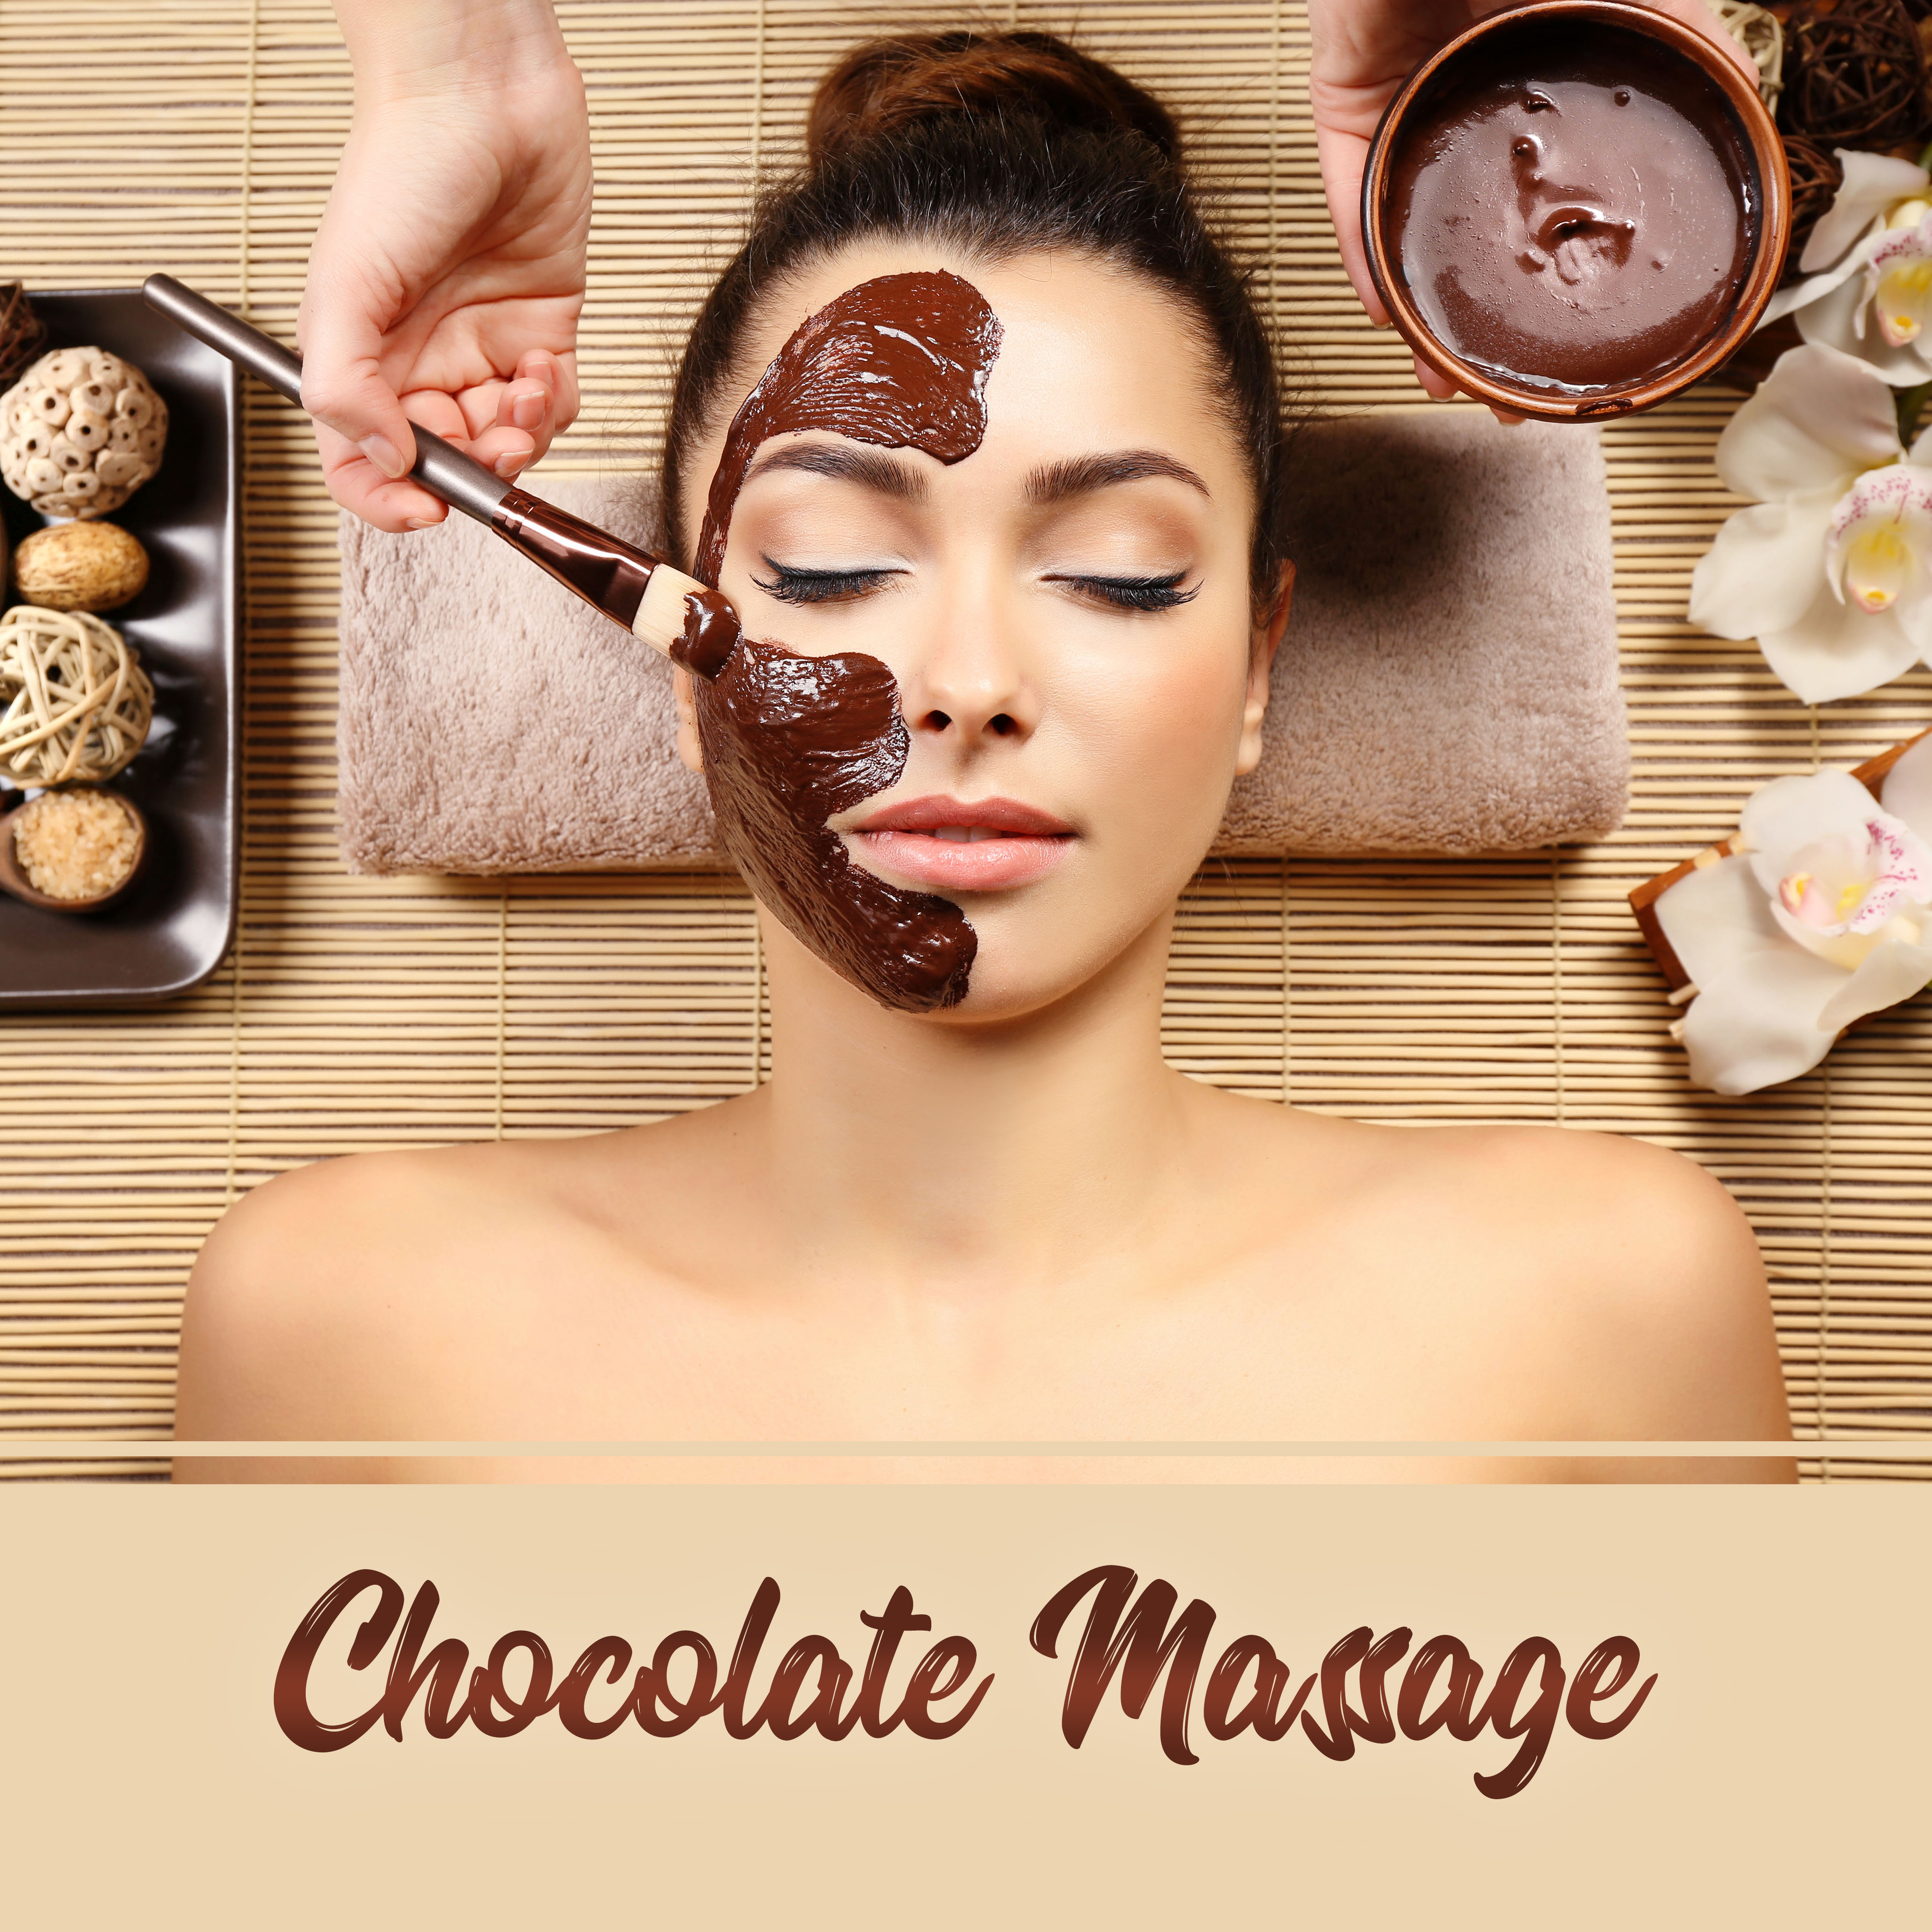 Chocolate Massage – 15 Relaxing Songs for Spa & Wellness